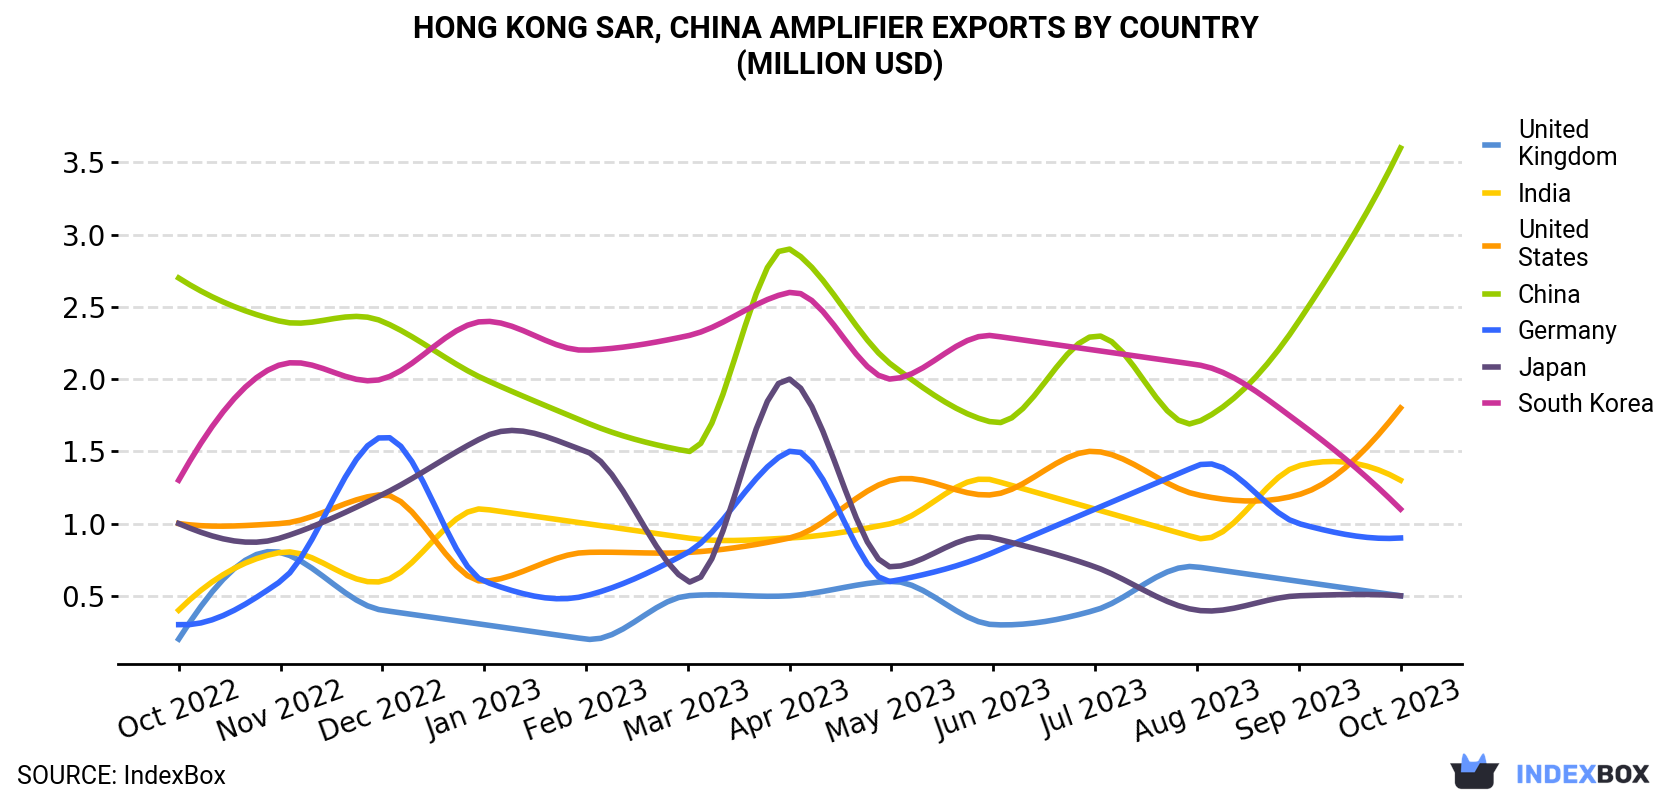 Hong Kong Amplifier Exports By Country (Million USD)